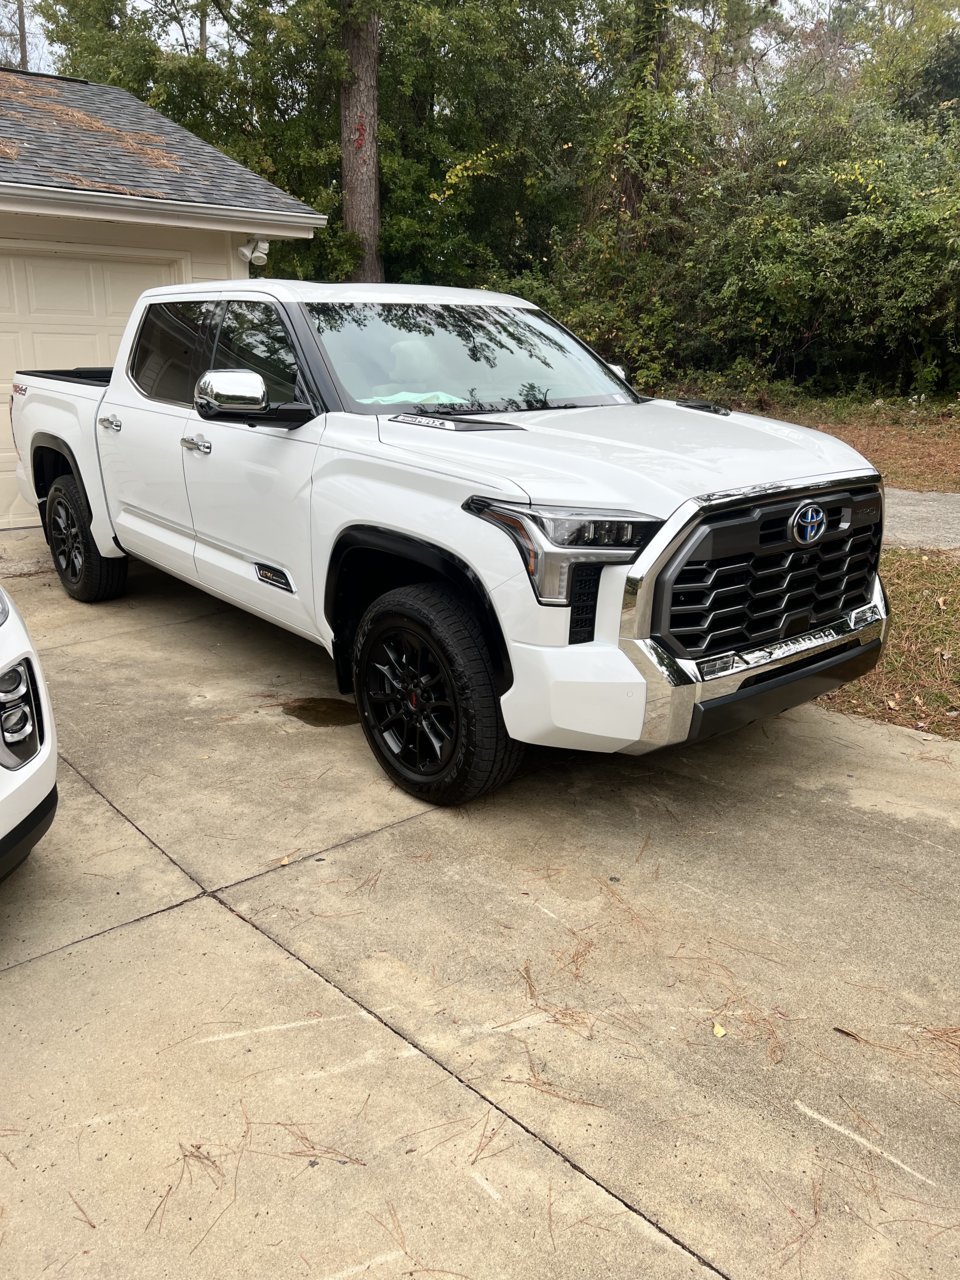 2023 Tundra iForce Max 1794 with TRD offroad package Toyota Tundra Forum